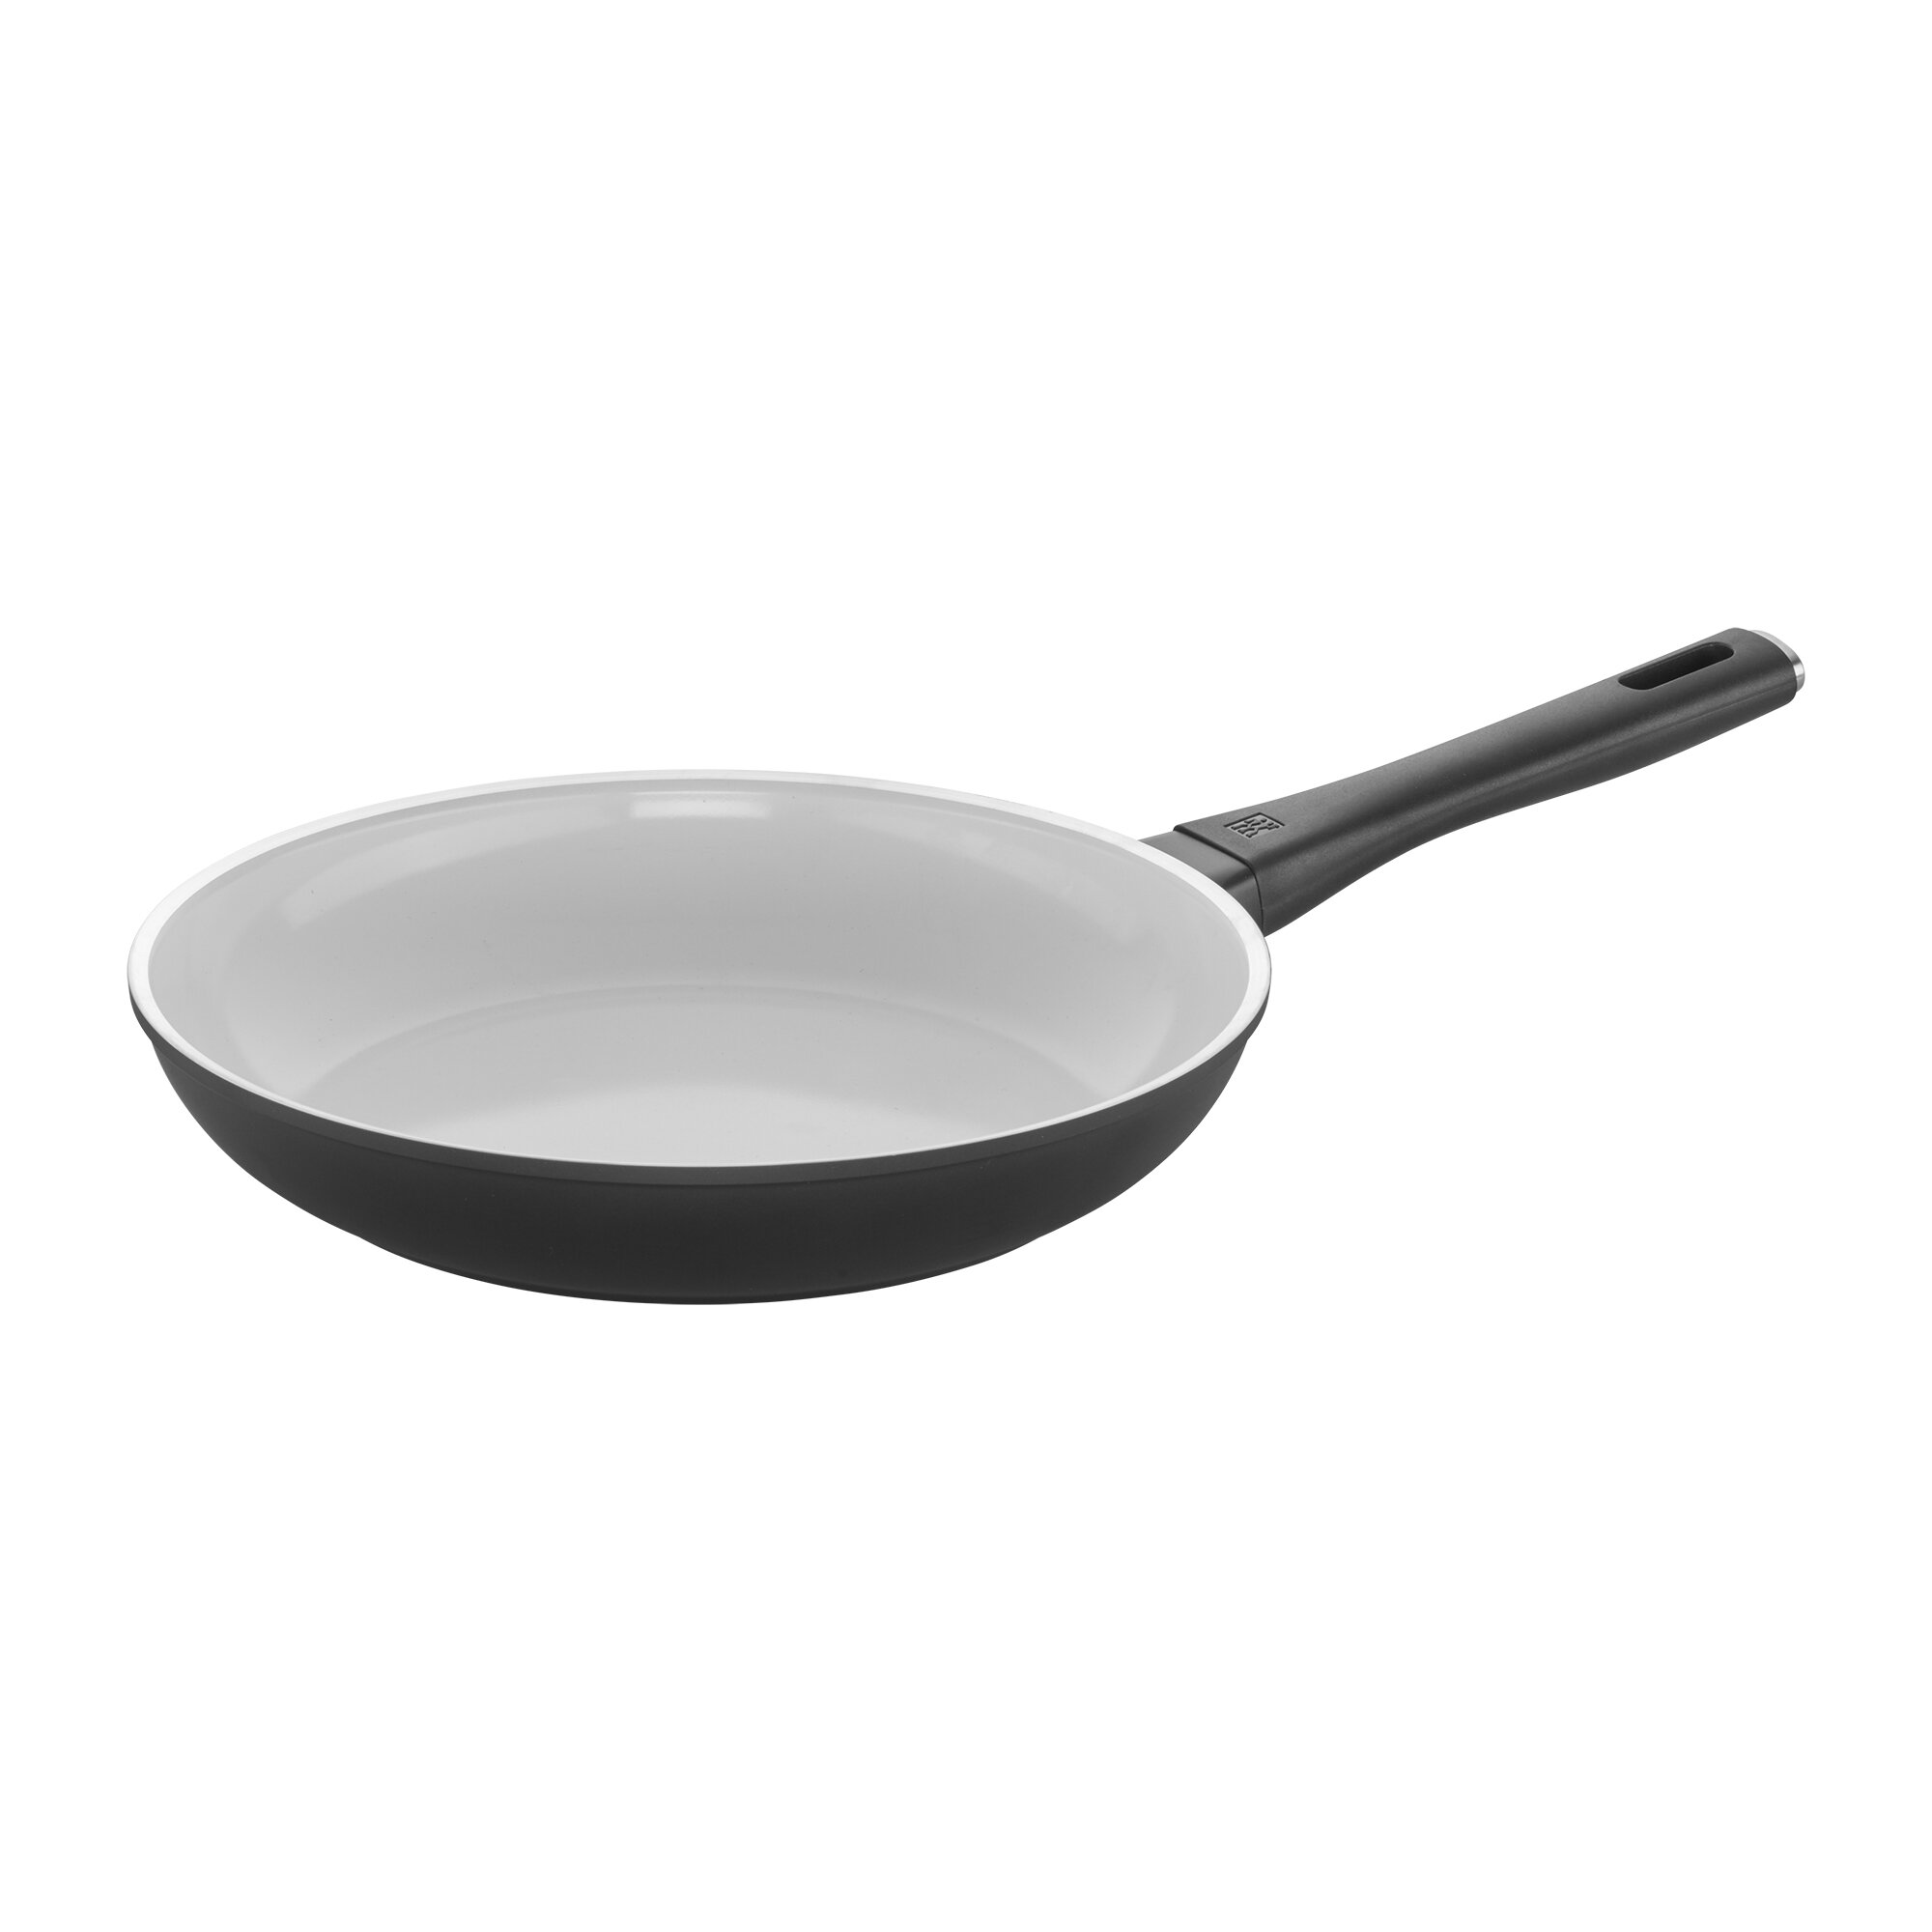 Zwilling Just Discounted My Favorite Nonstick Skillet, Plus 10